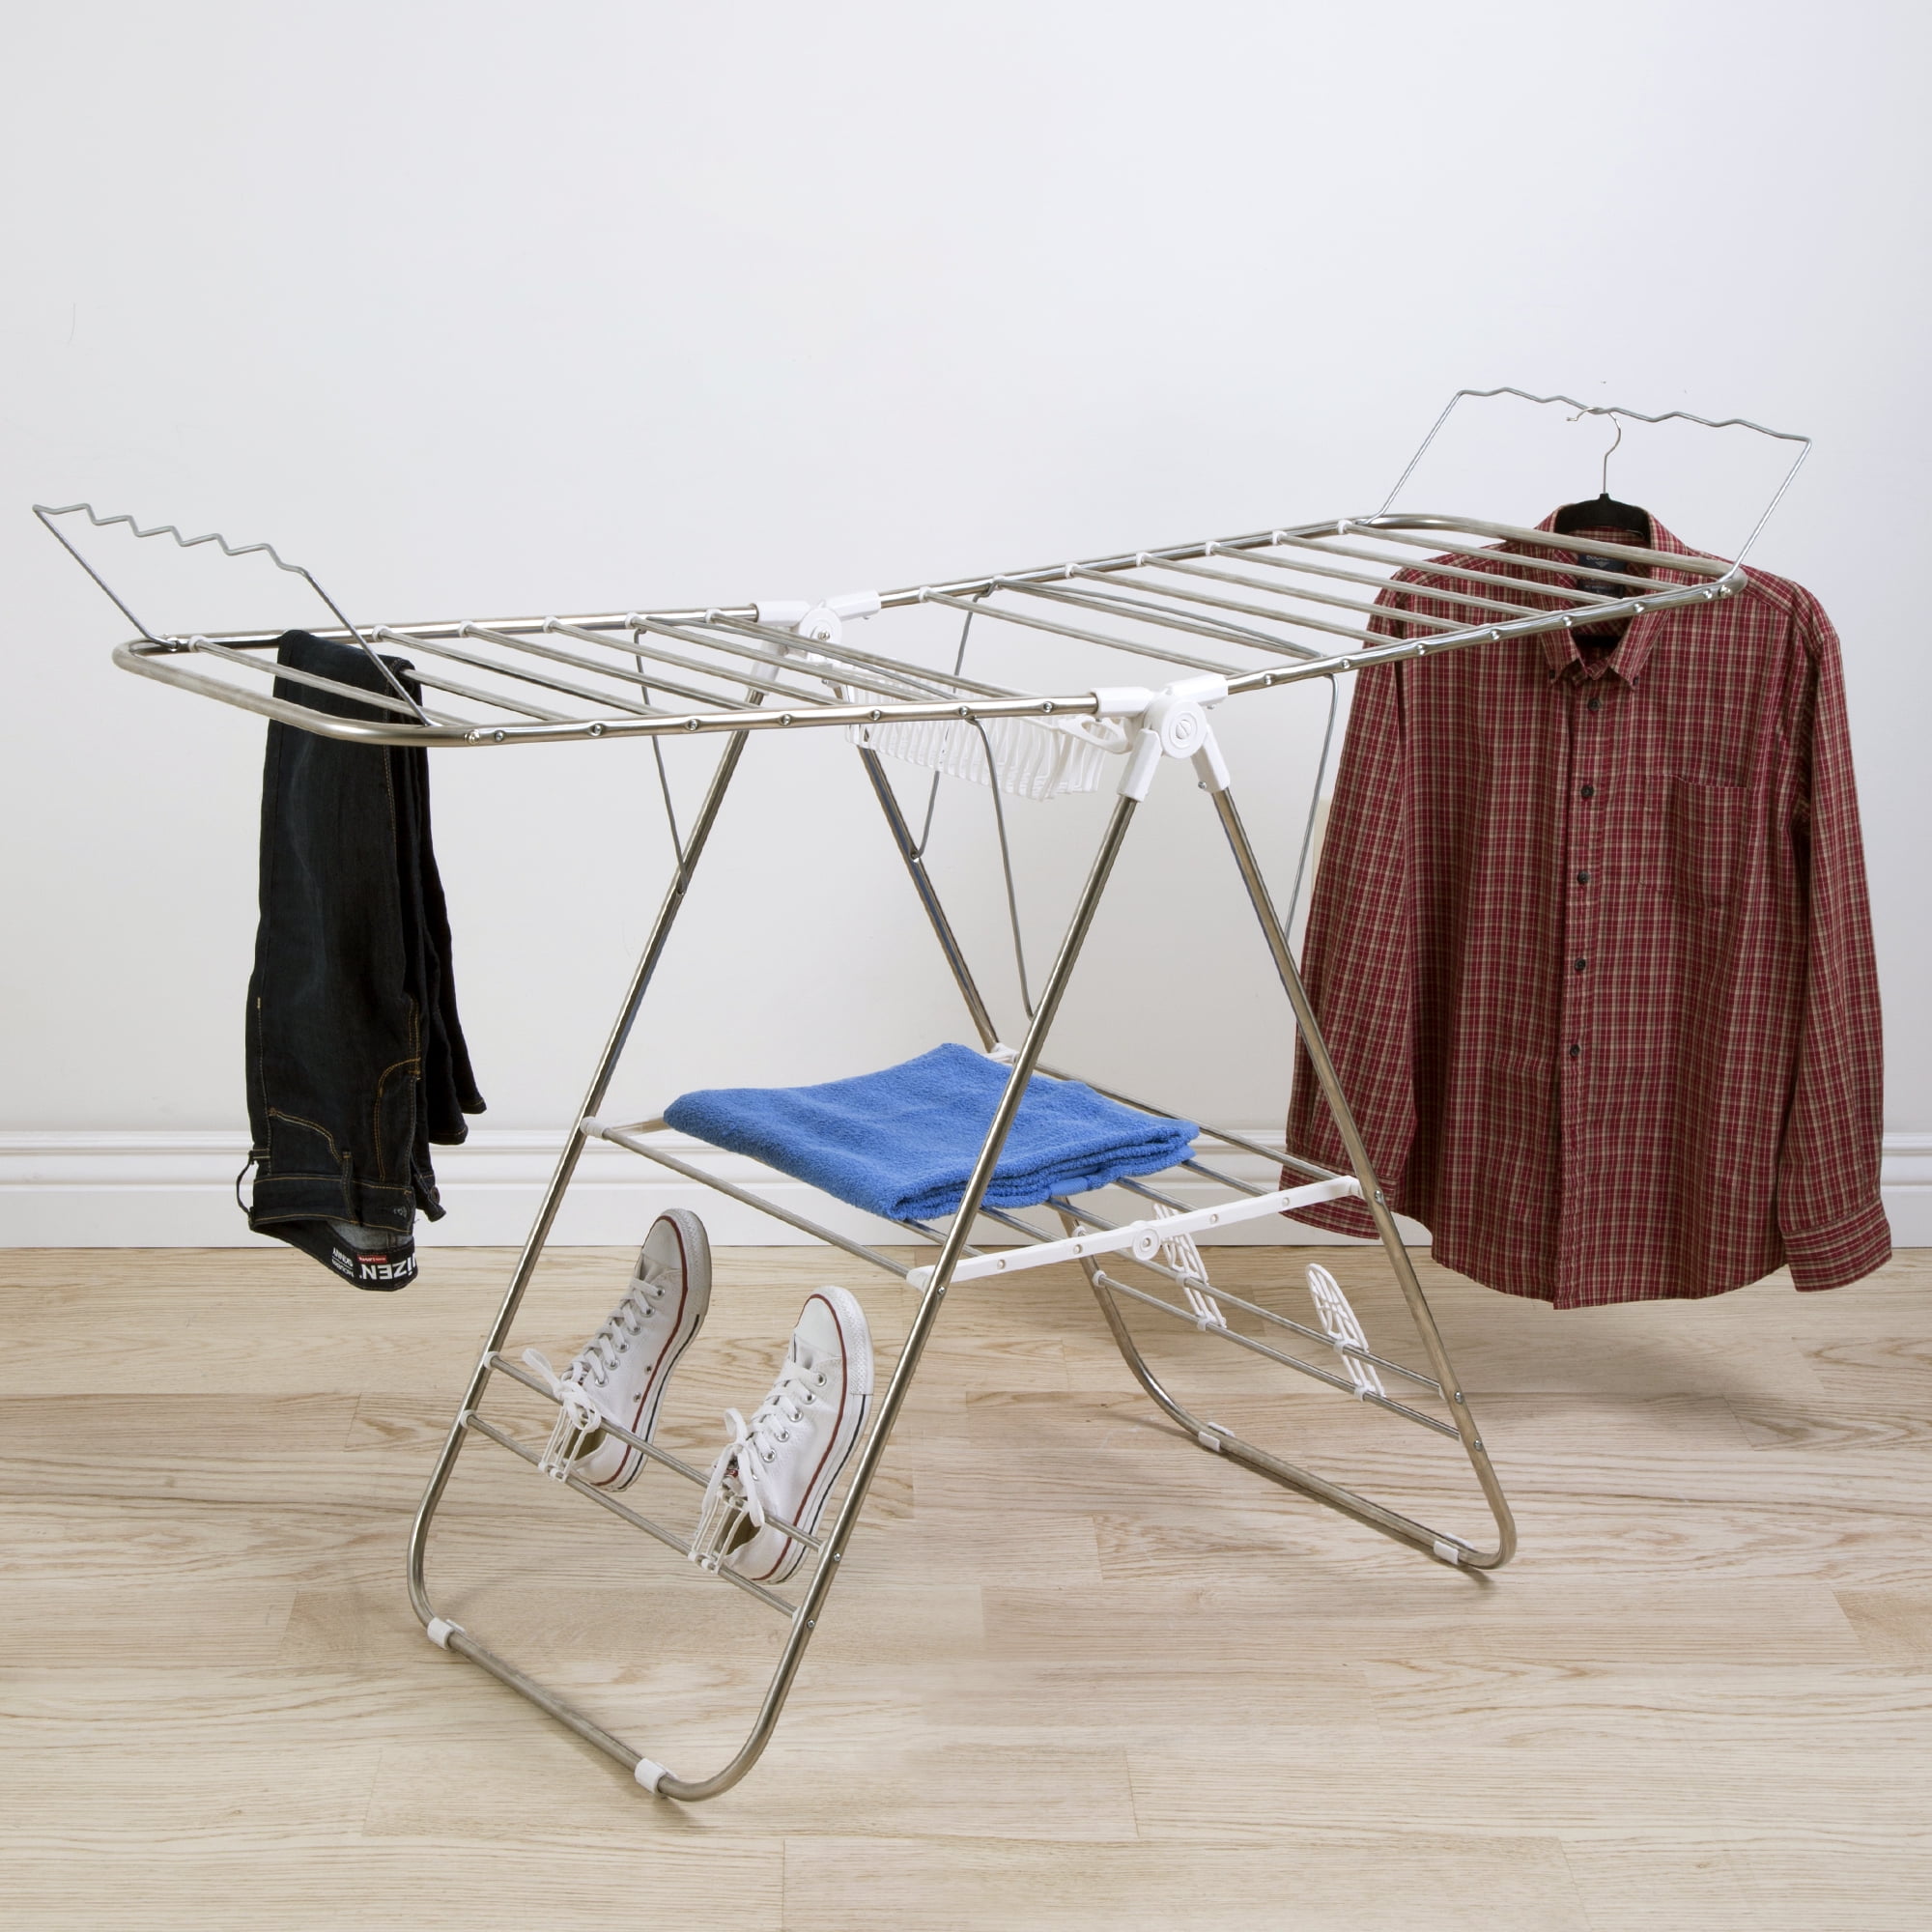 Stainless Steel Clothes Drying Rack Floor Drying Towel Rack Folding Laundry Rack 